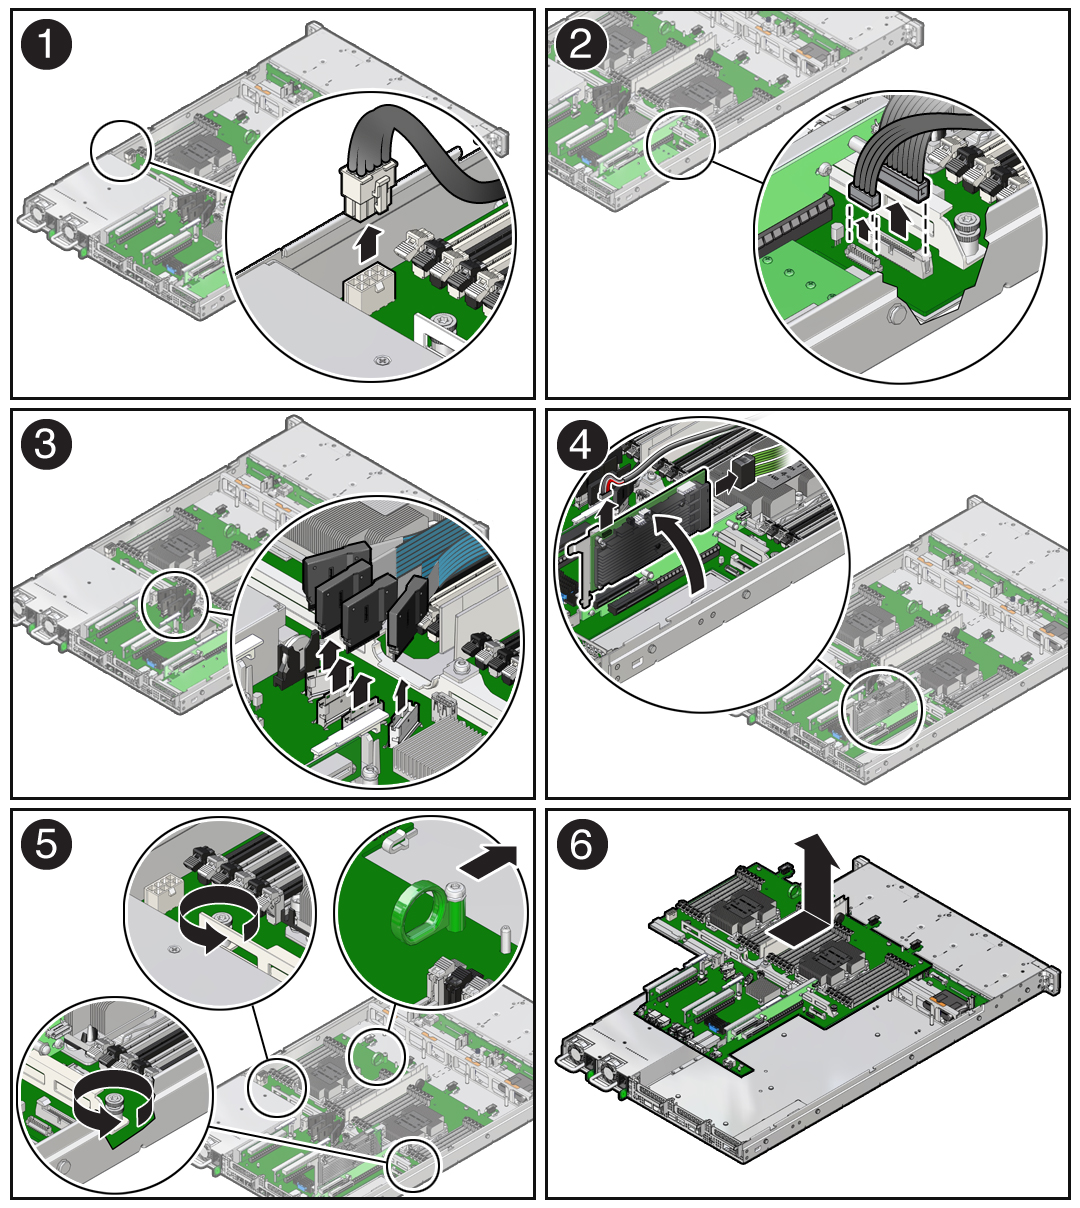 image:Figure showing how to remove the motherboard from the                                     server.